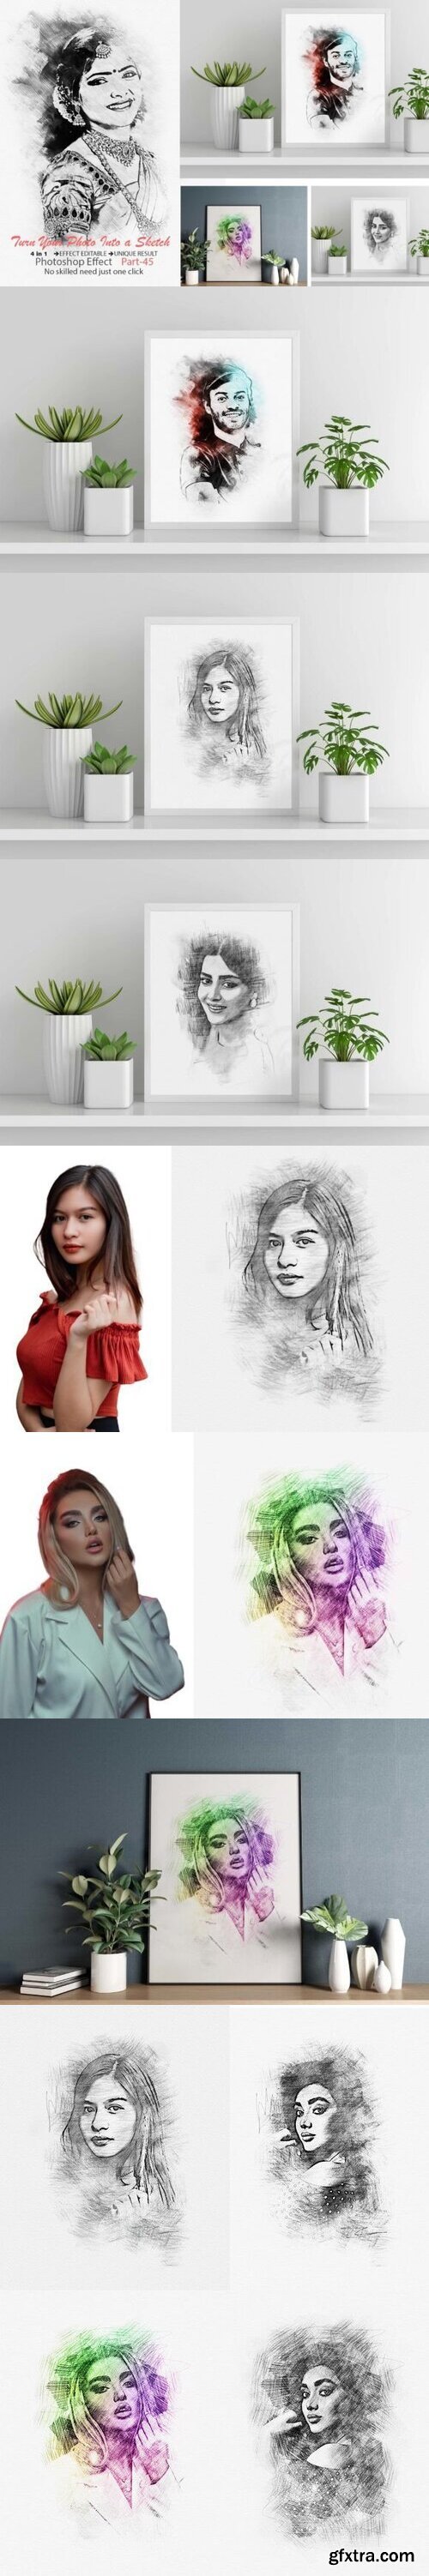 Turn Your Photo into a Sketch